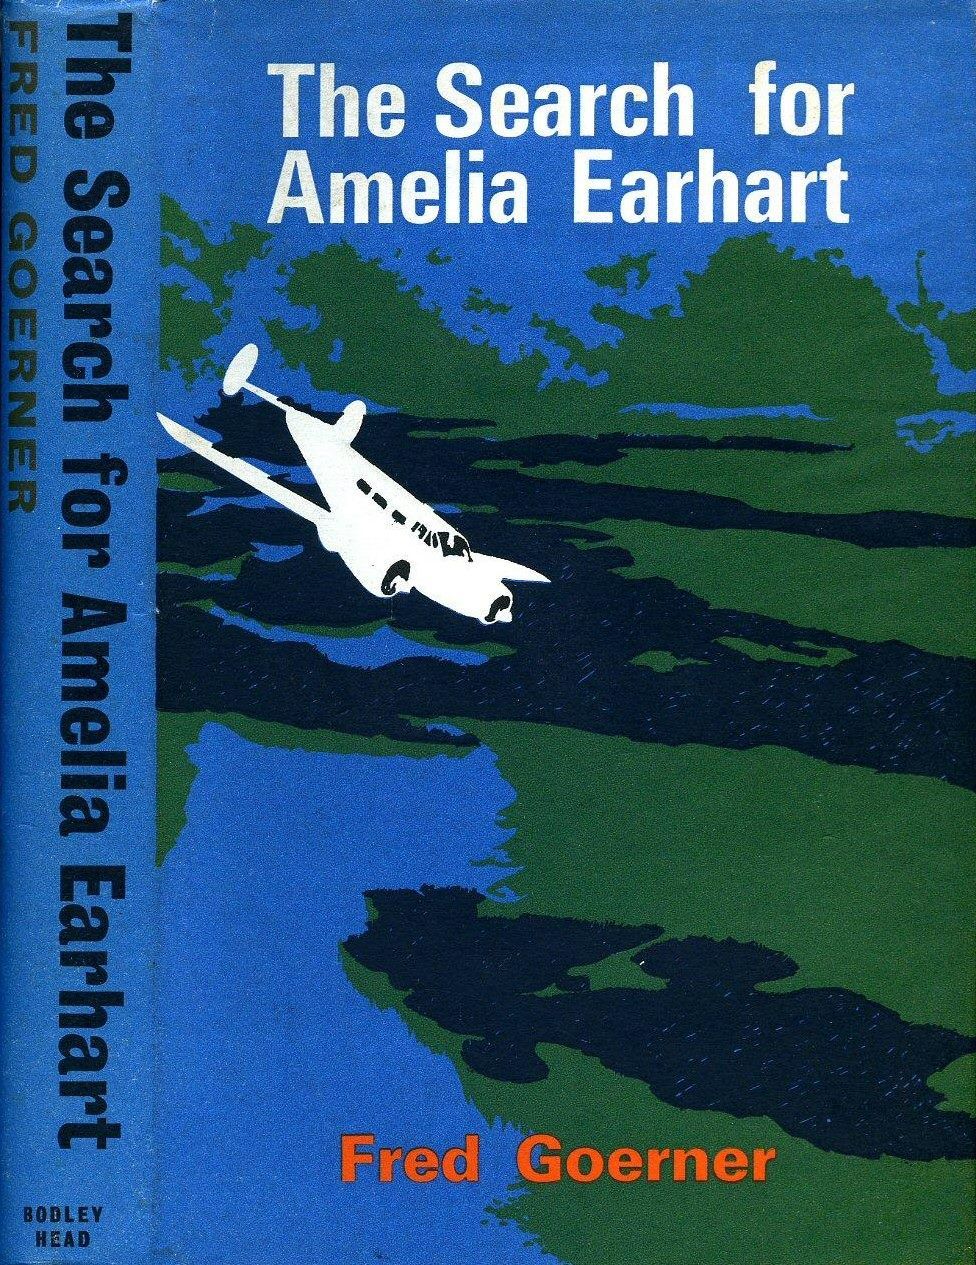 THE SEARCH FOR AMELIA EARHART